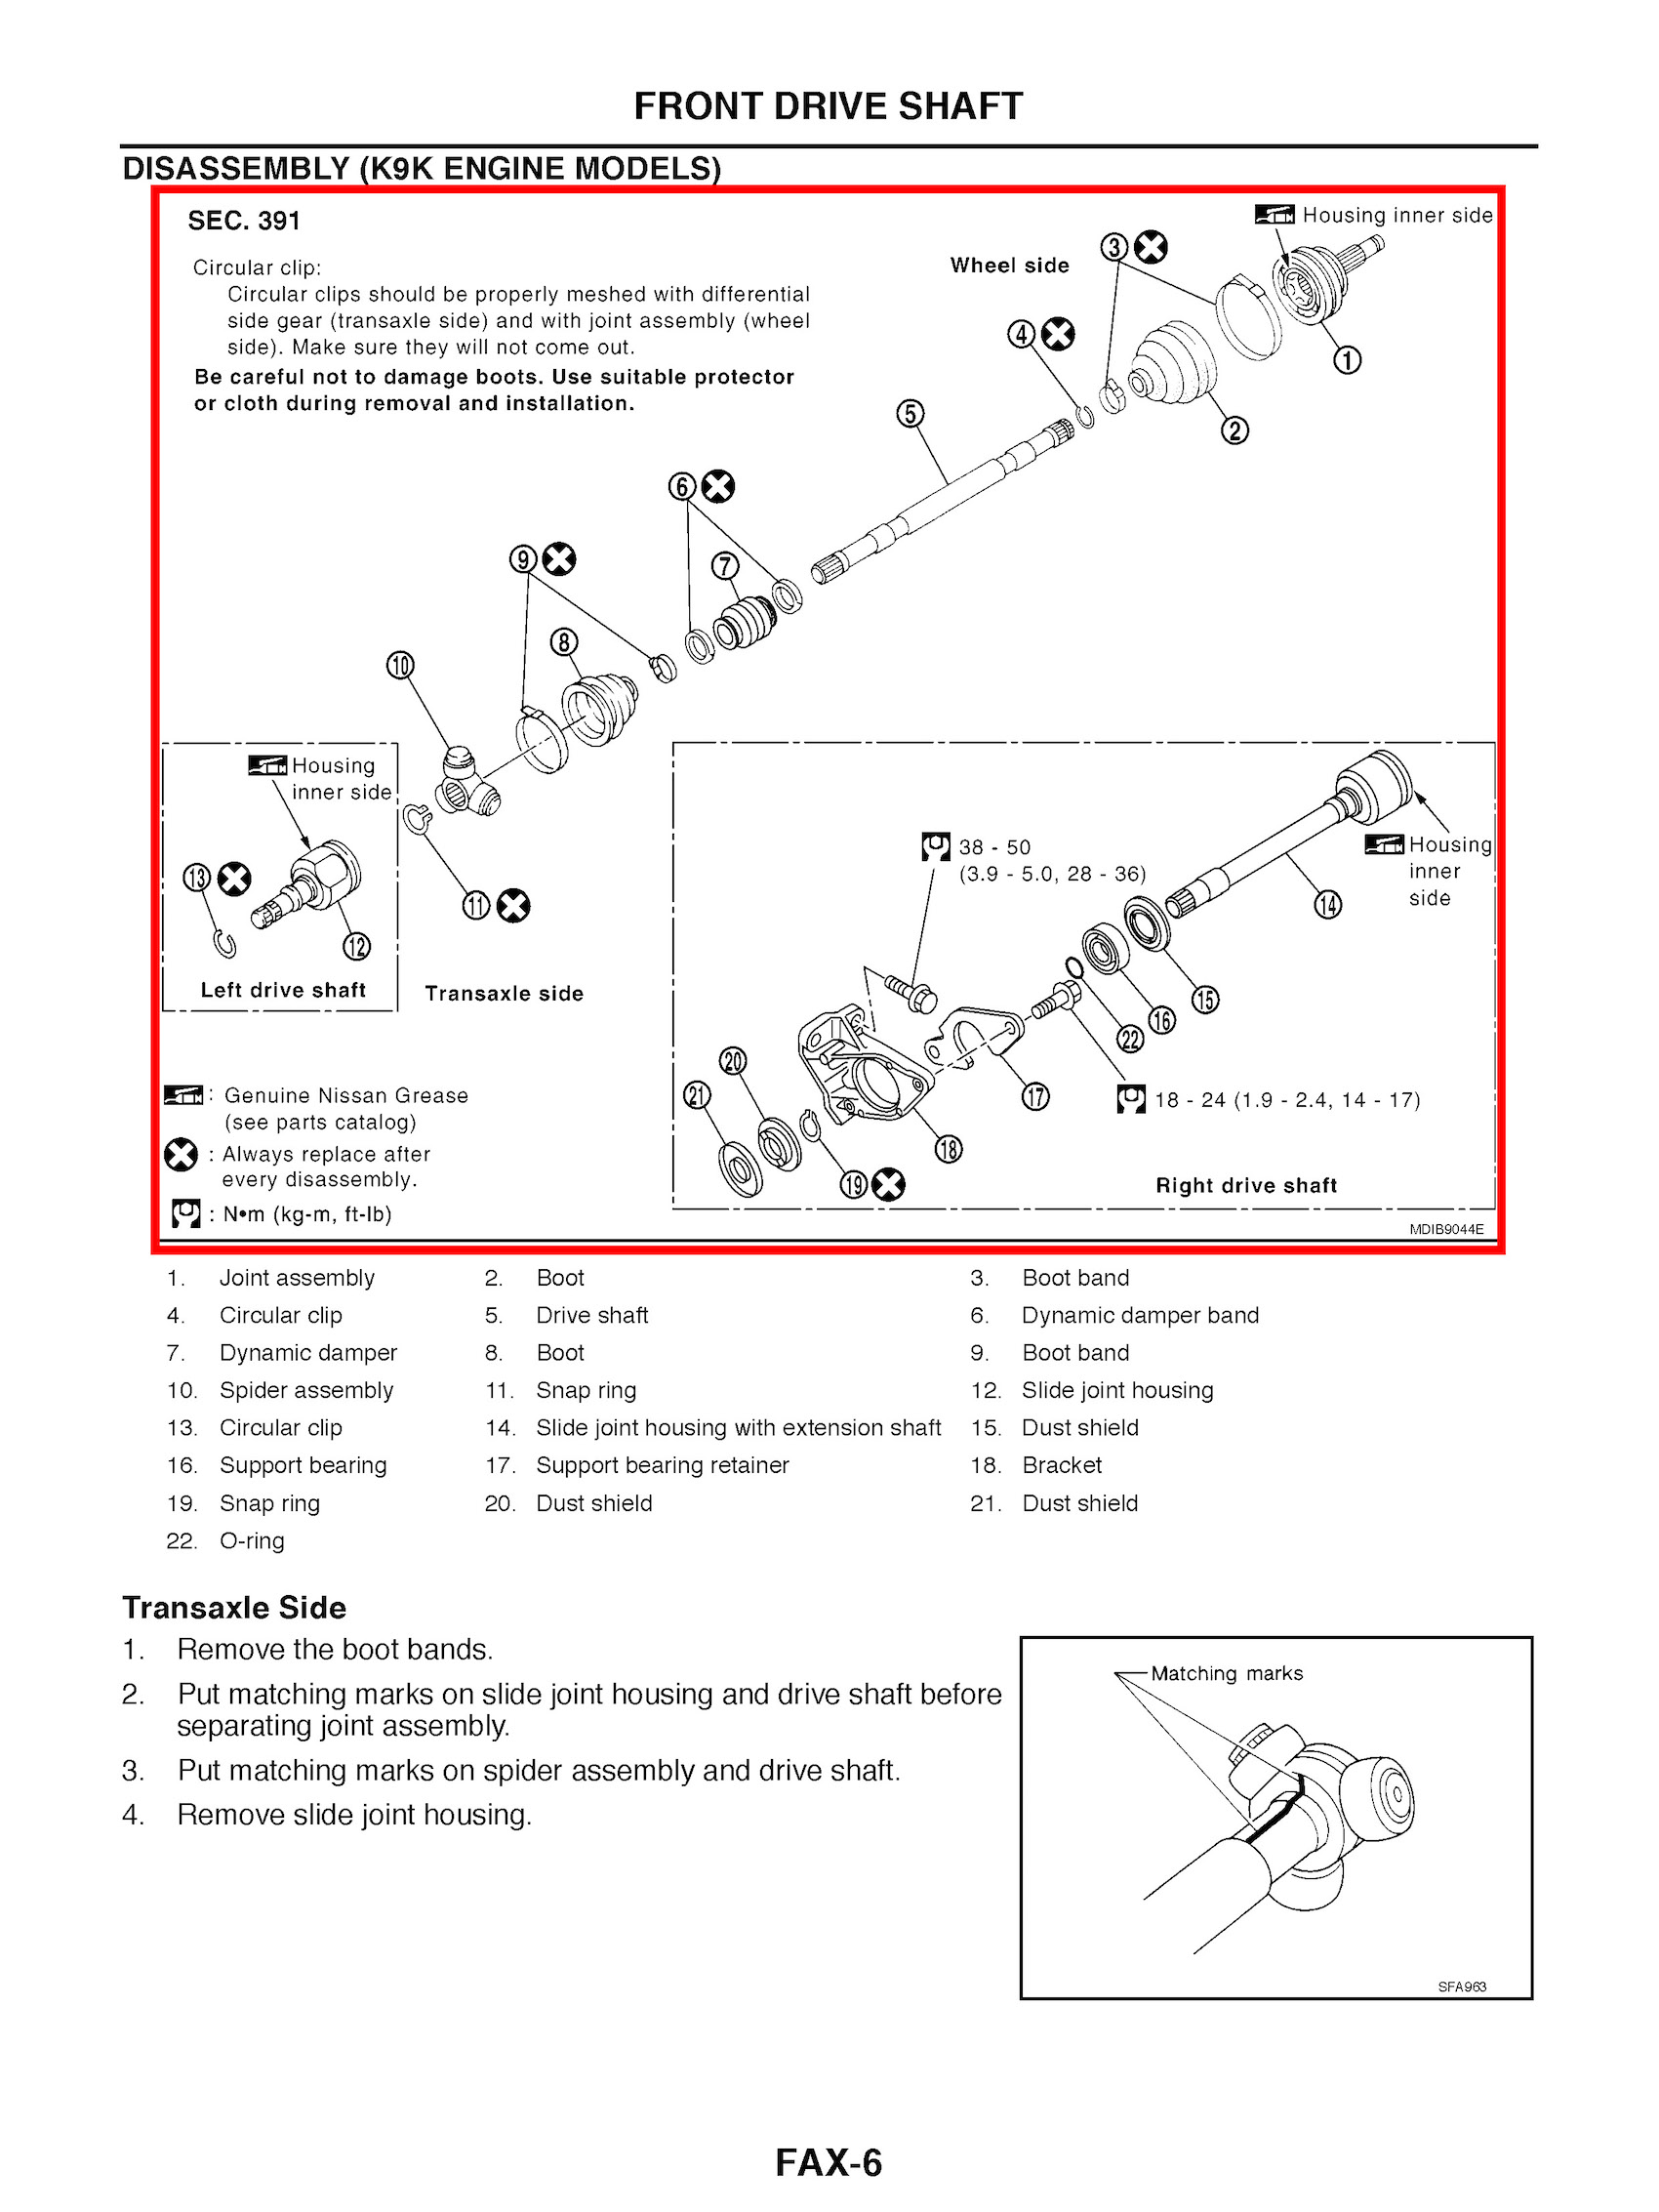 Nissan Micra Repair Manual, front drive shaft removal and installation